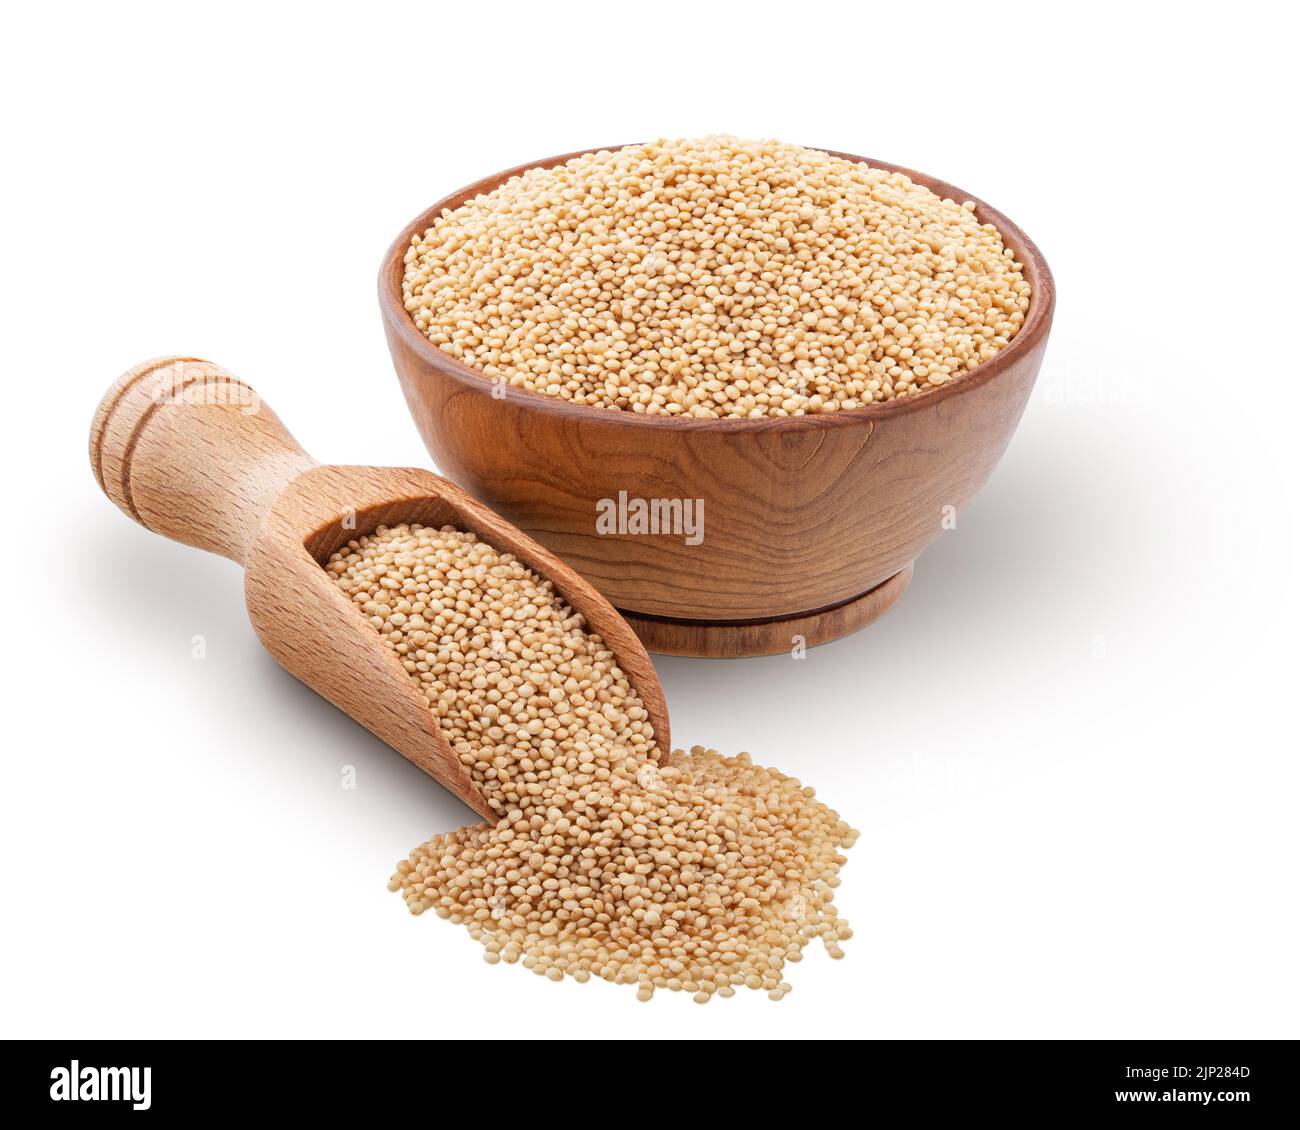 Wooden bowl and scoop full of amaranth seeds isolated on white background. Deep focus Stock Photo